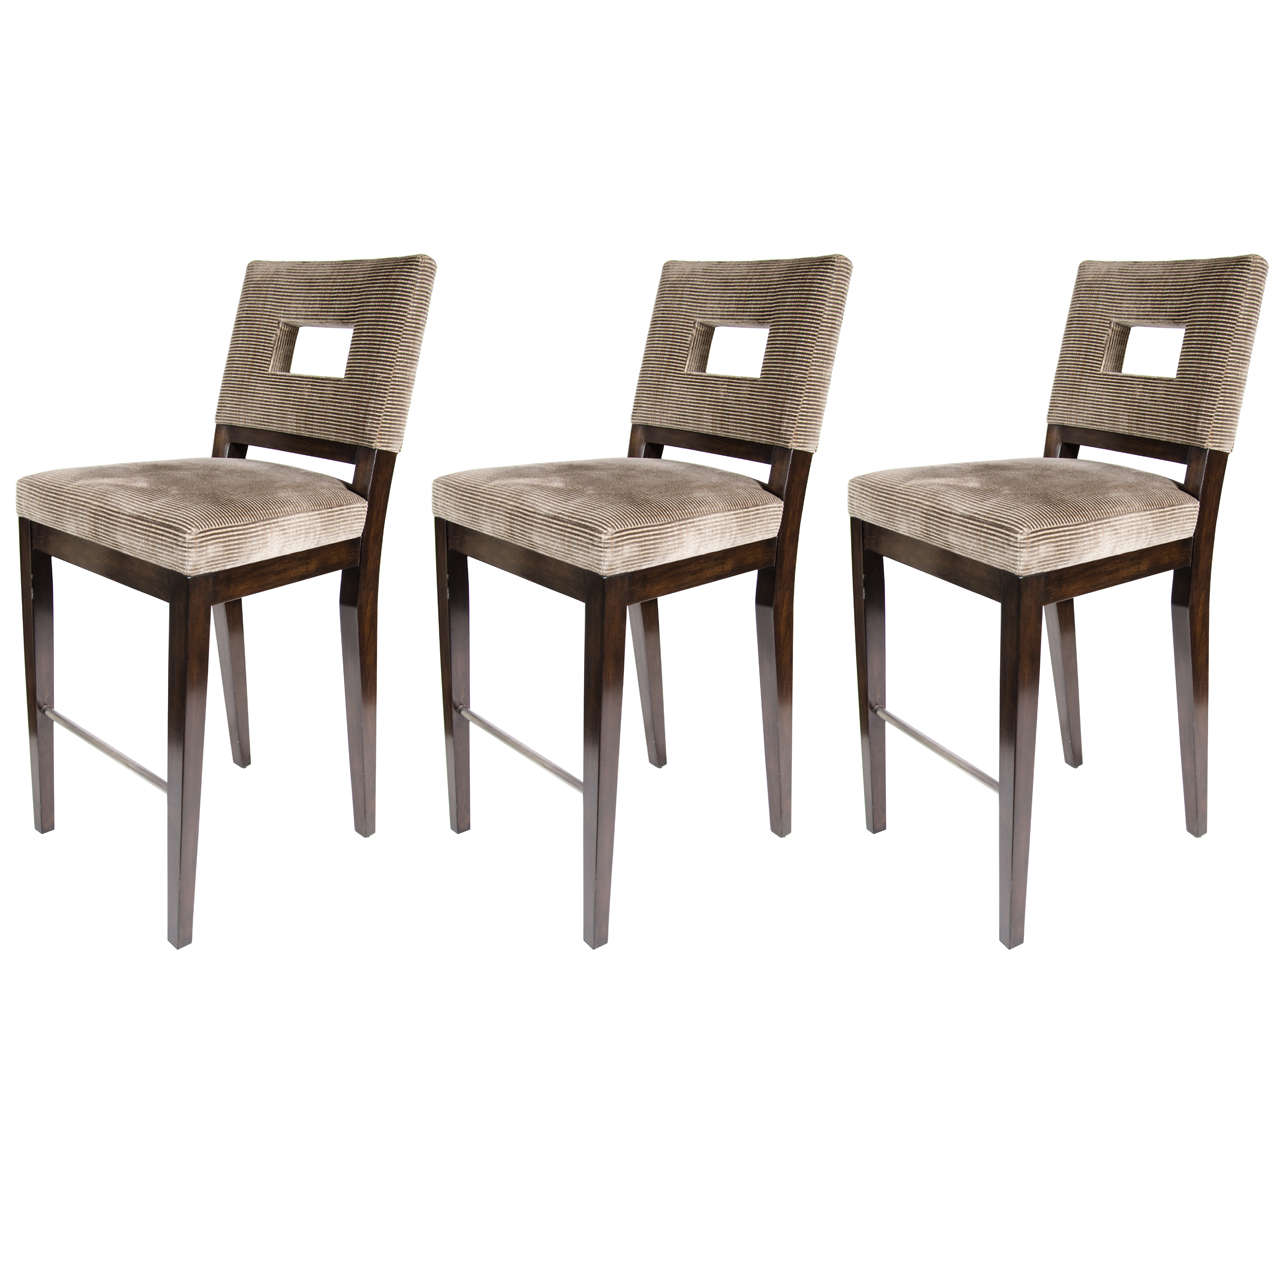 Set of Three Mid-Century Modern Bar Stools with Cut-Out Back Design